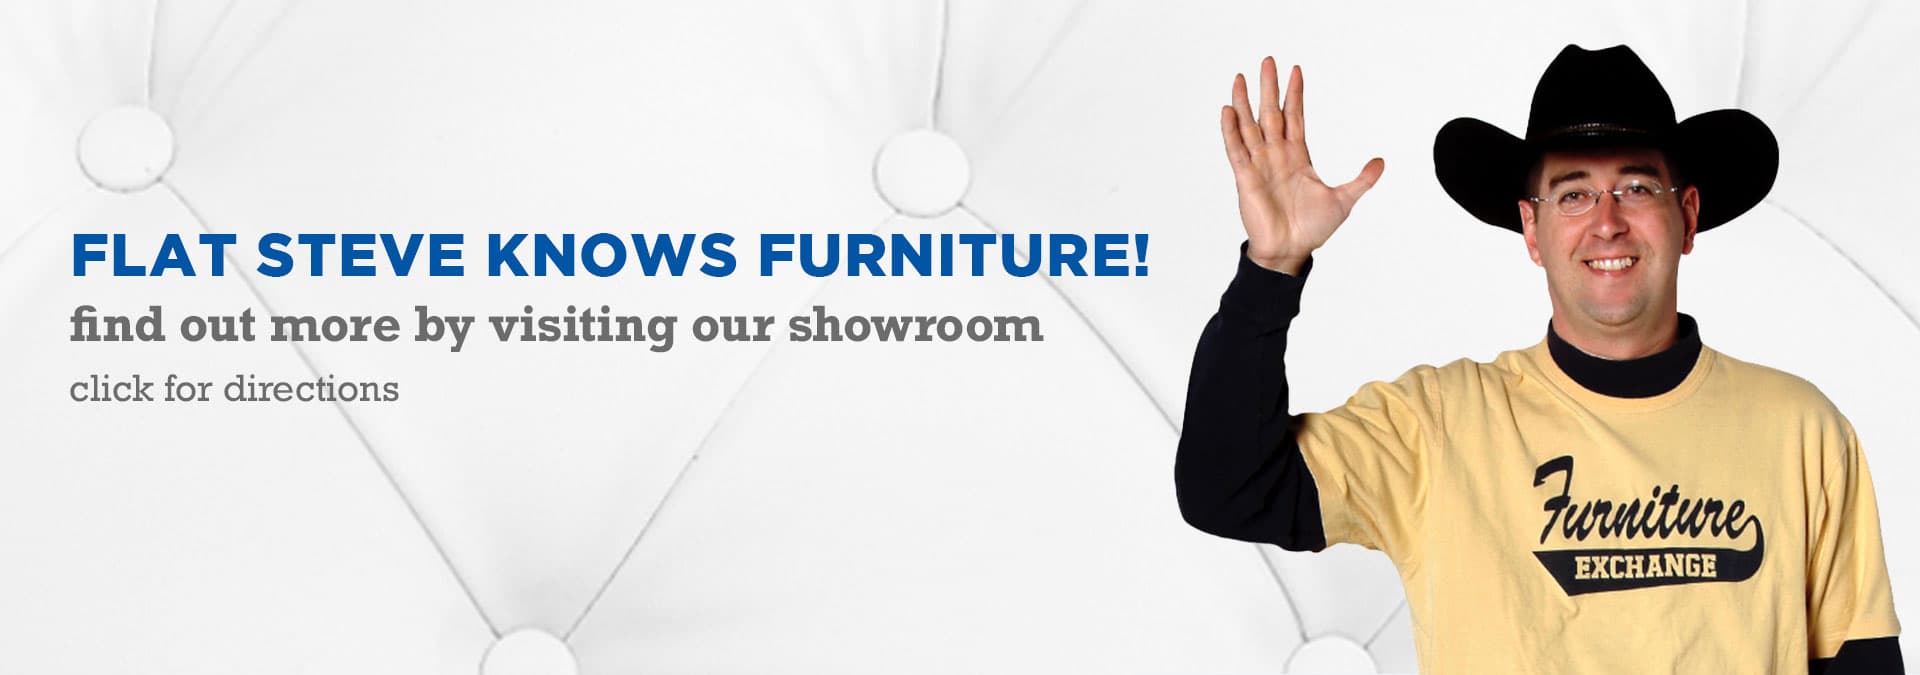 Flat steve knows furniture! find out more by visiting our showroom – Click for directions